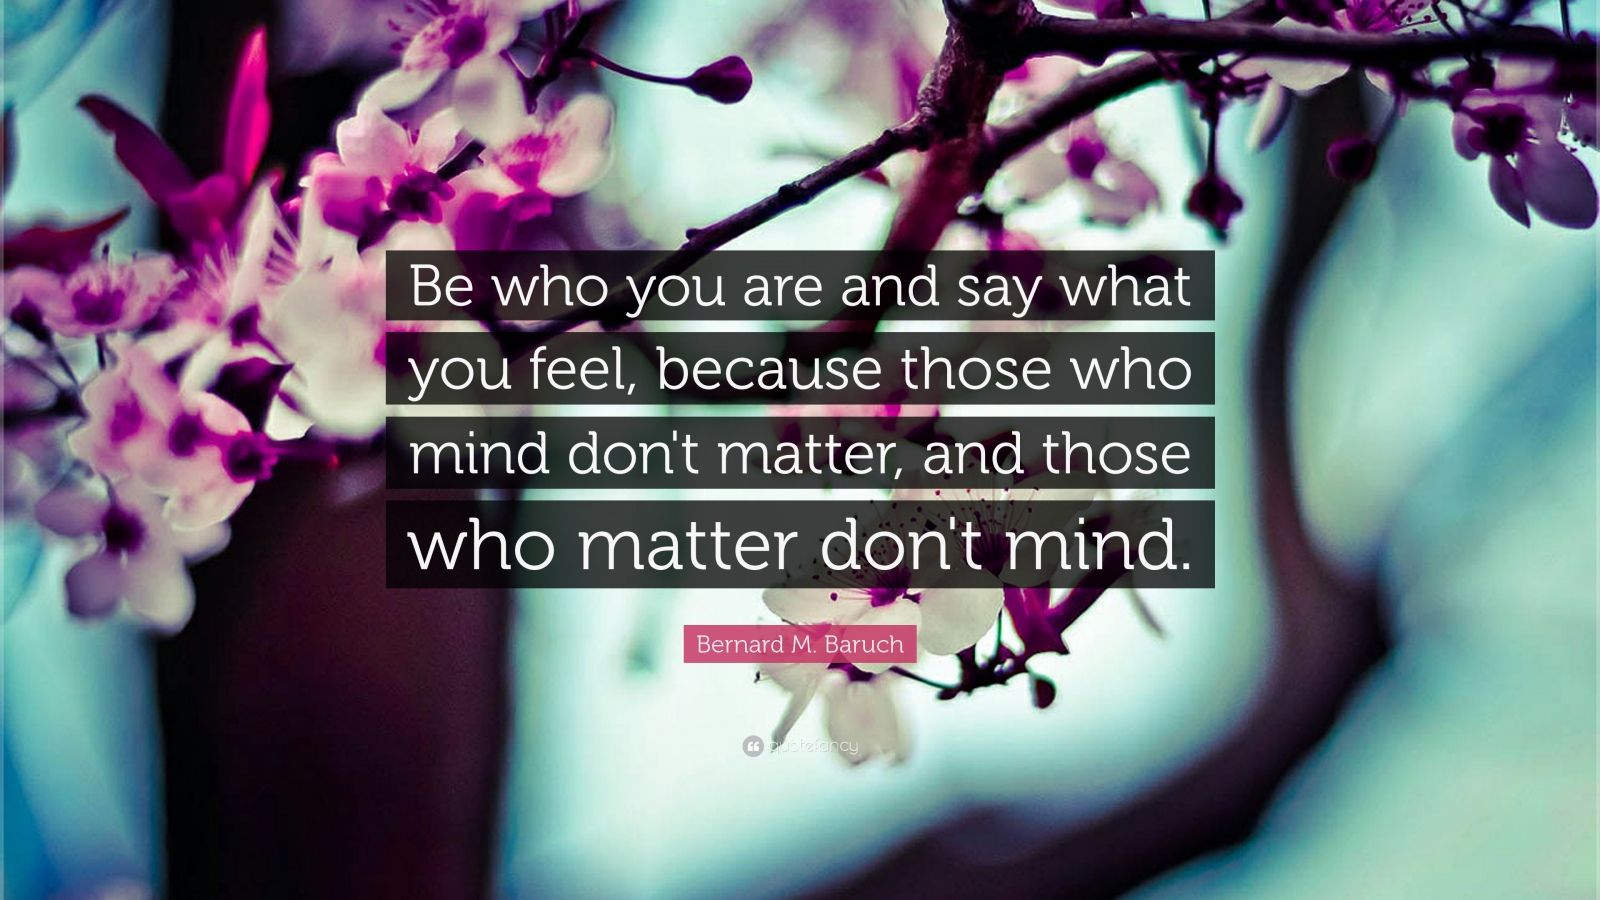 Bernard M. Baruch Quote: “Be who you are and say what you feel, because